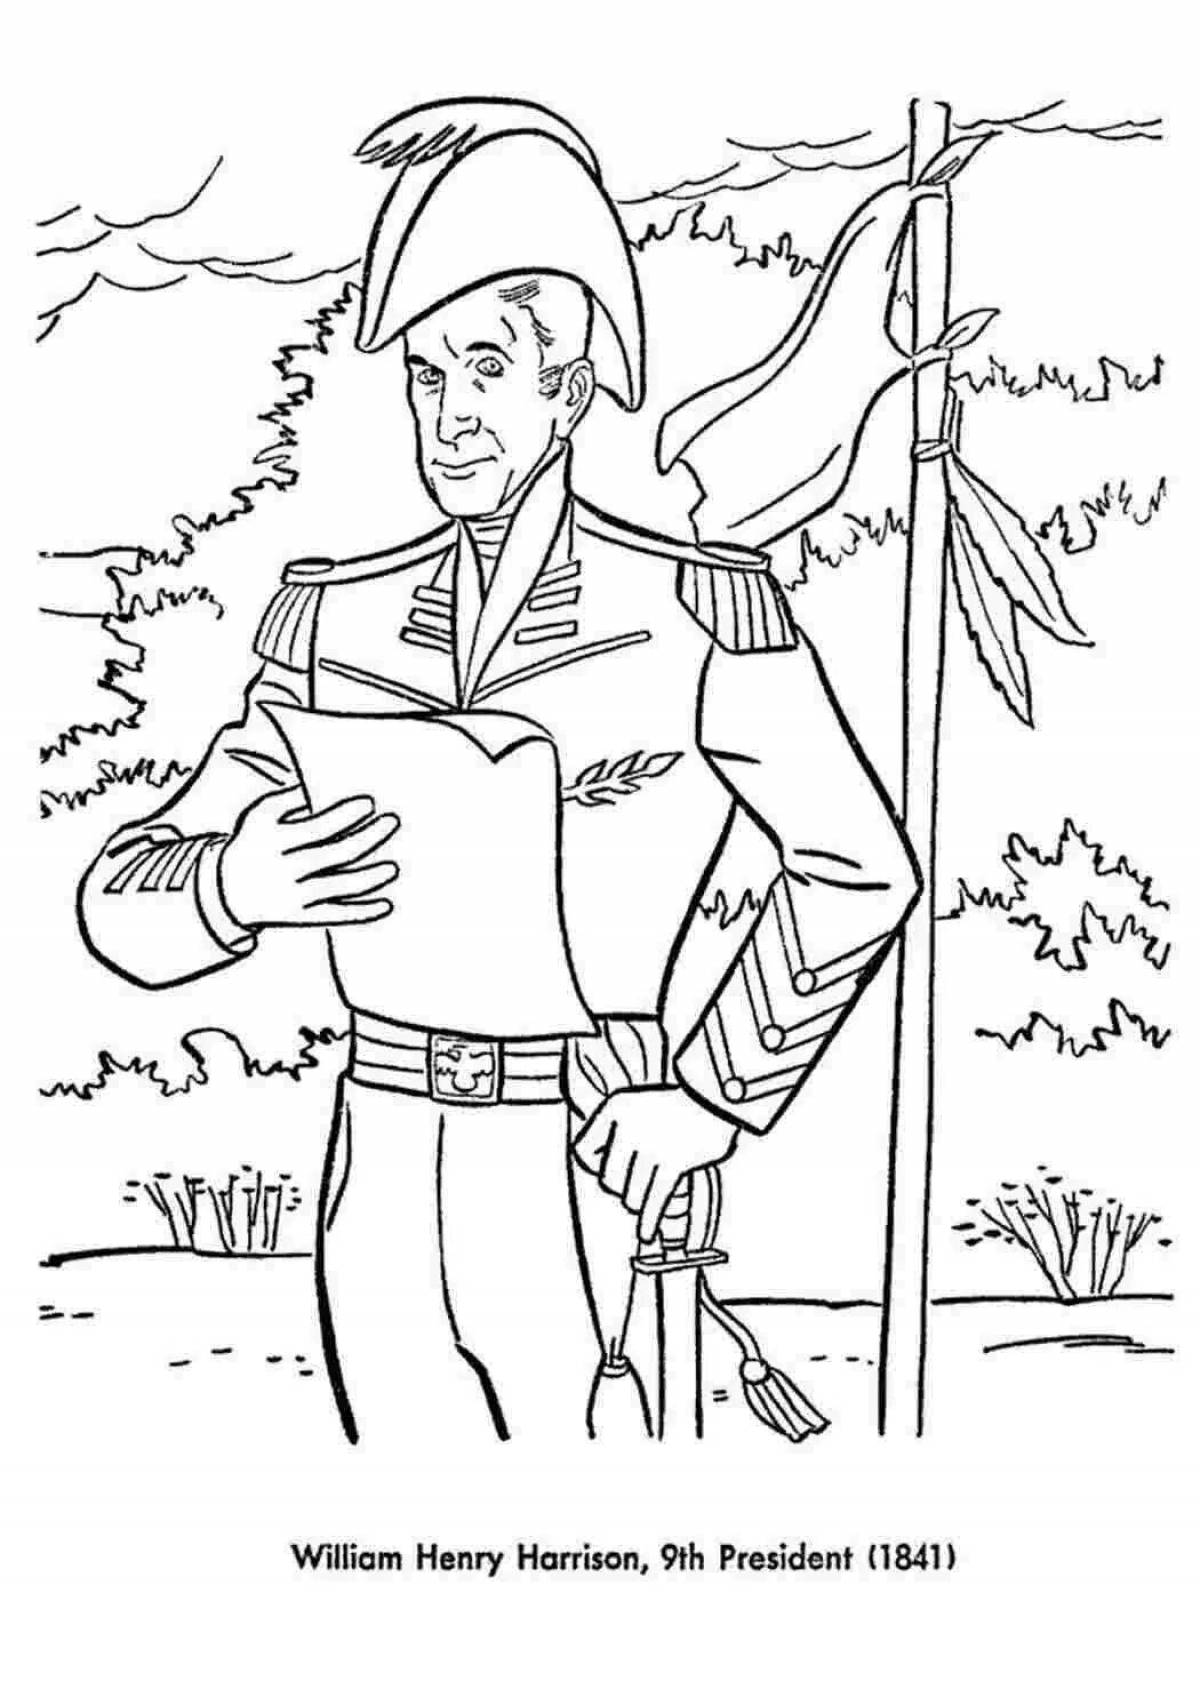 Suvorov's awesome coloring book